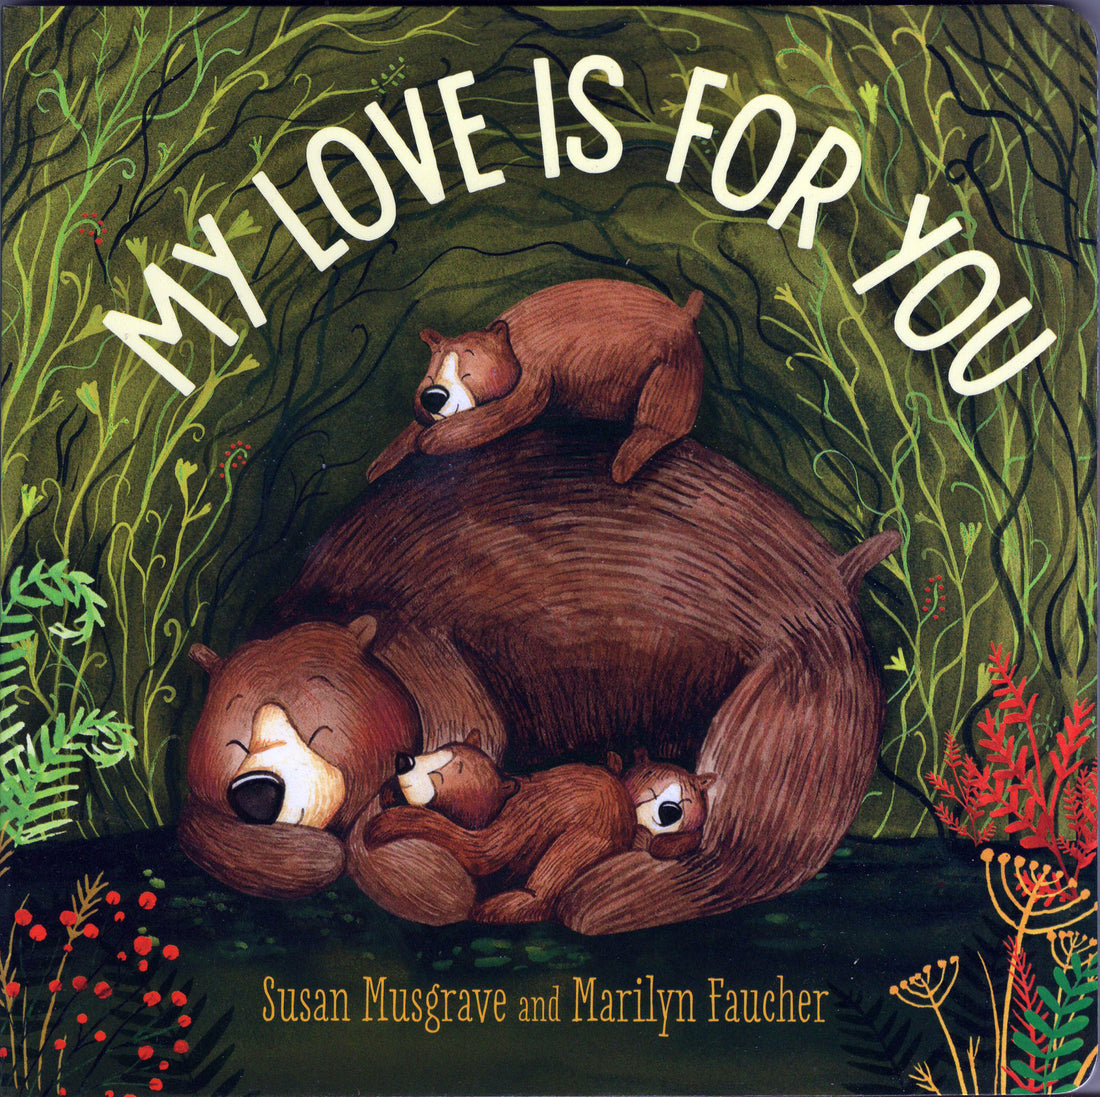 My Love Is For You | Board Book